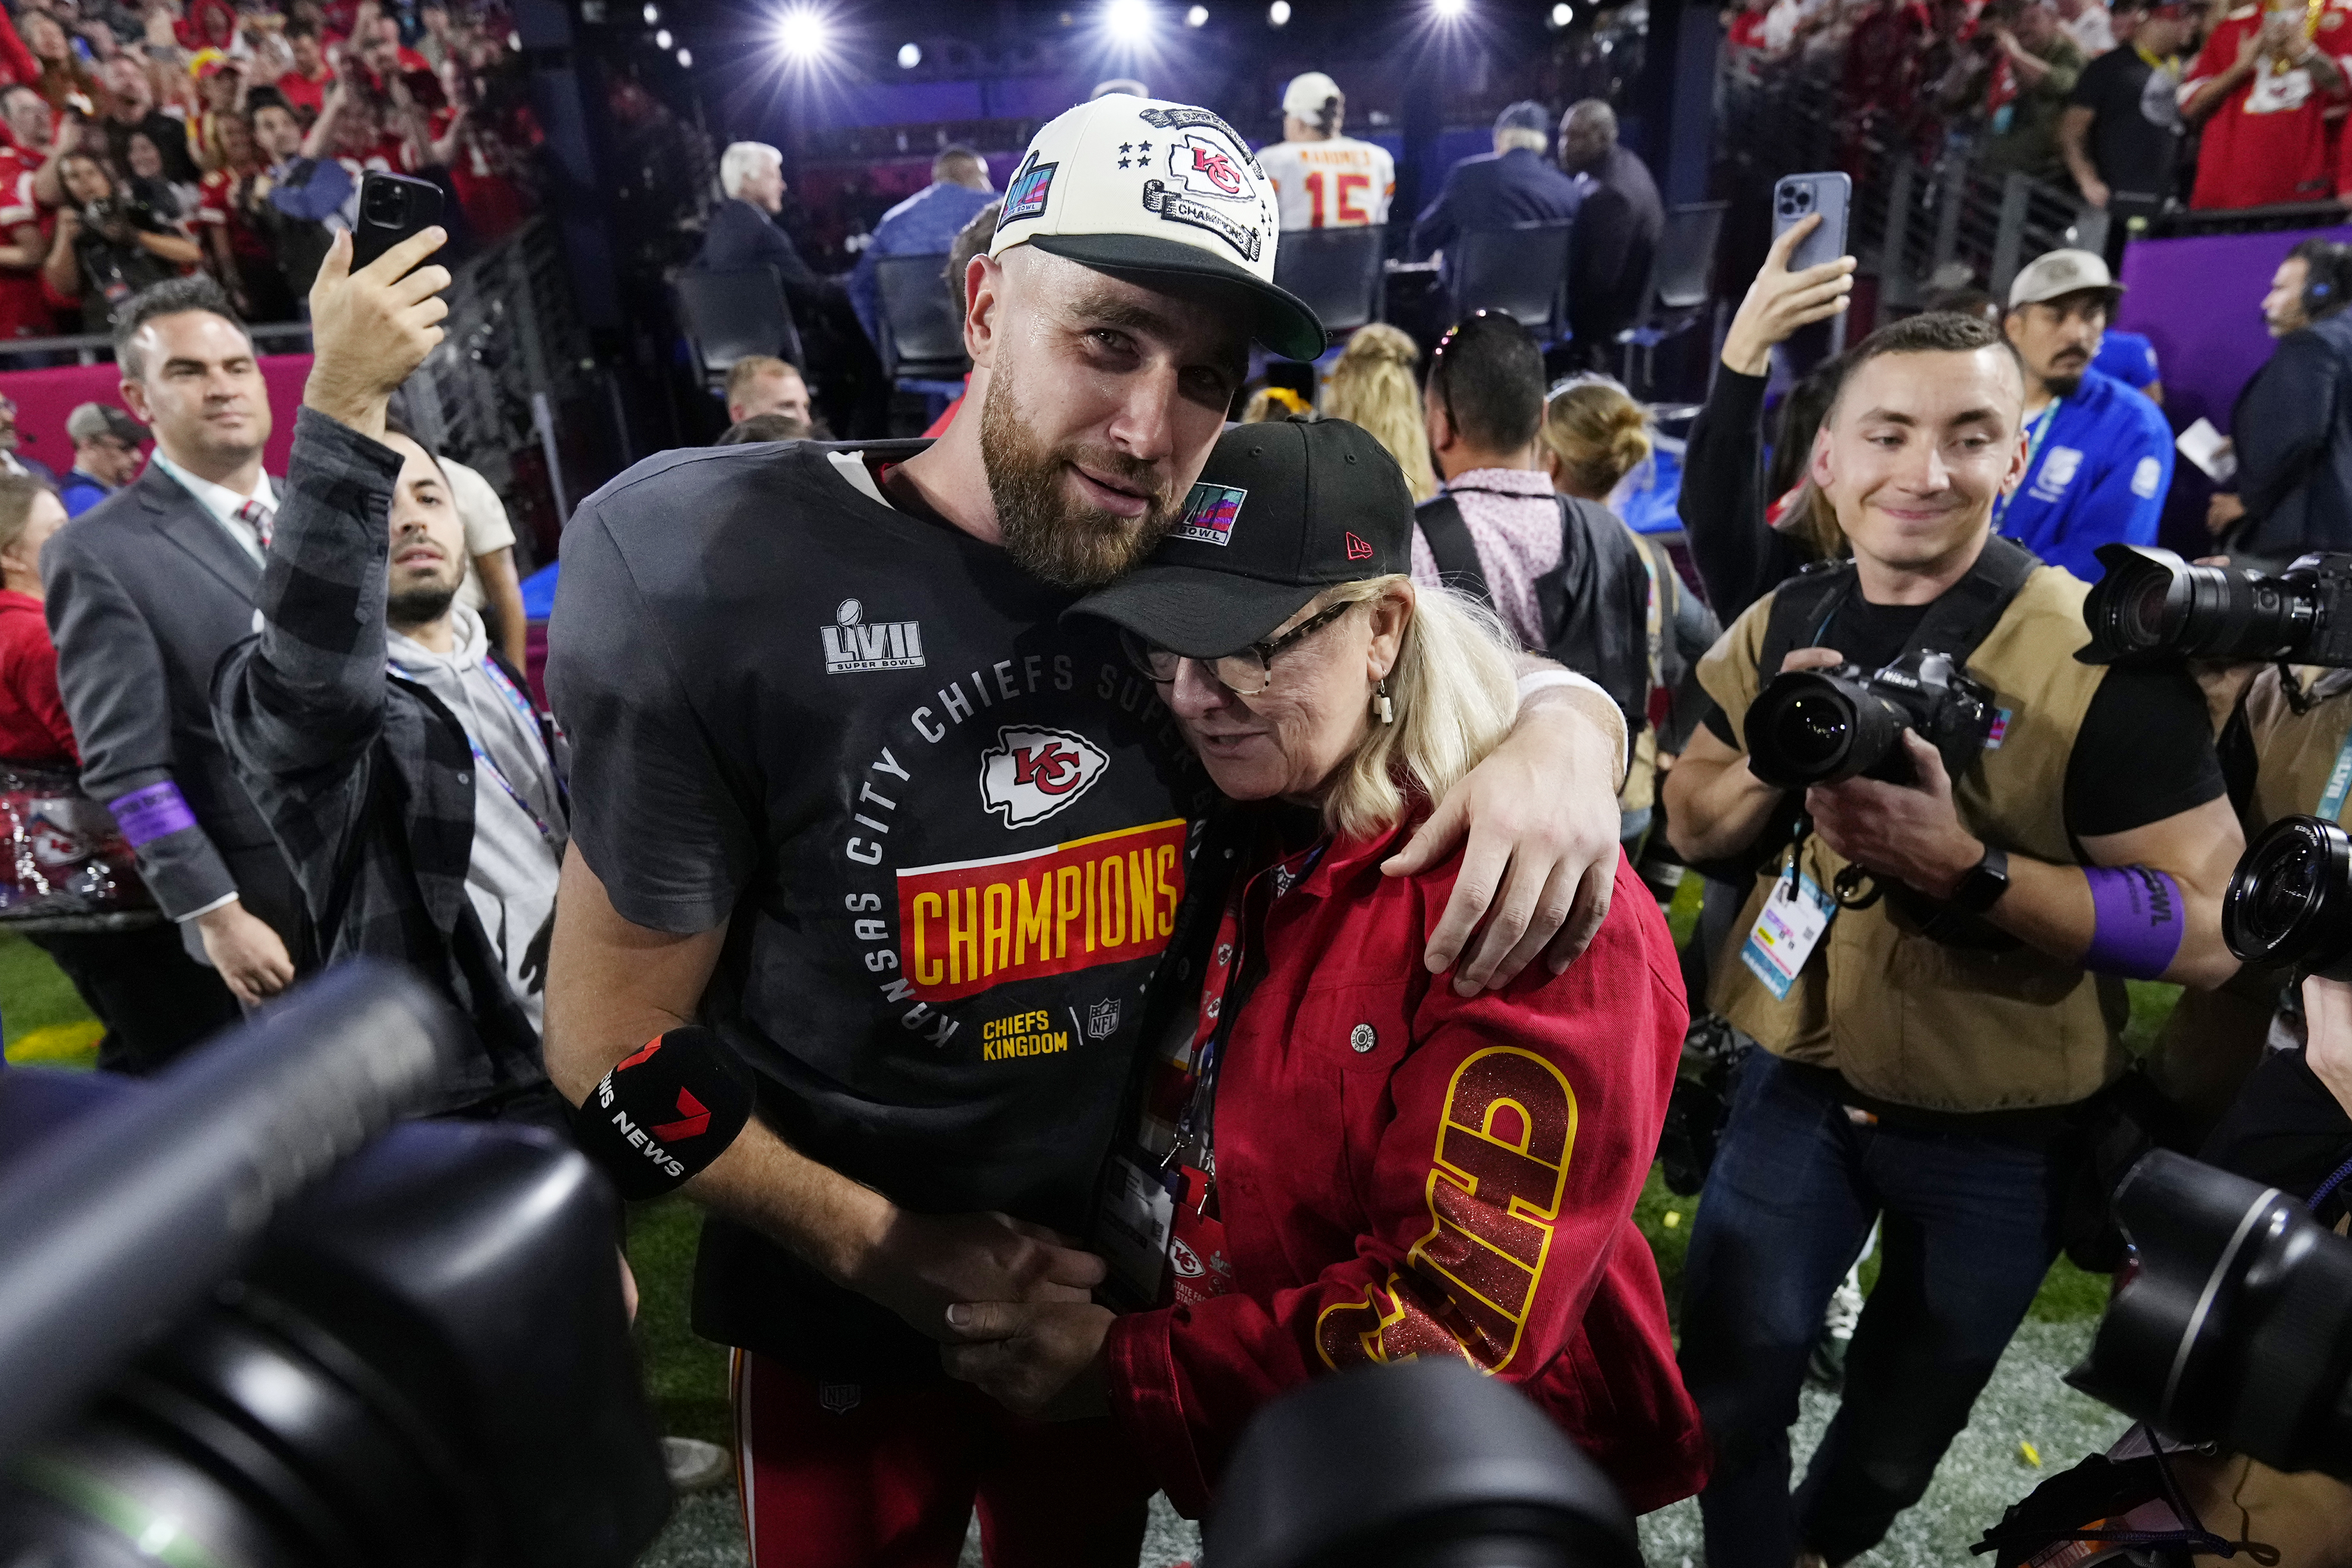 Donna Kelce's viral Super Bowl outfit was made by Maryland woman - The  Washington Post